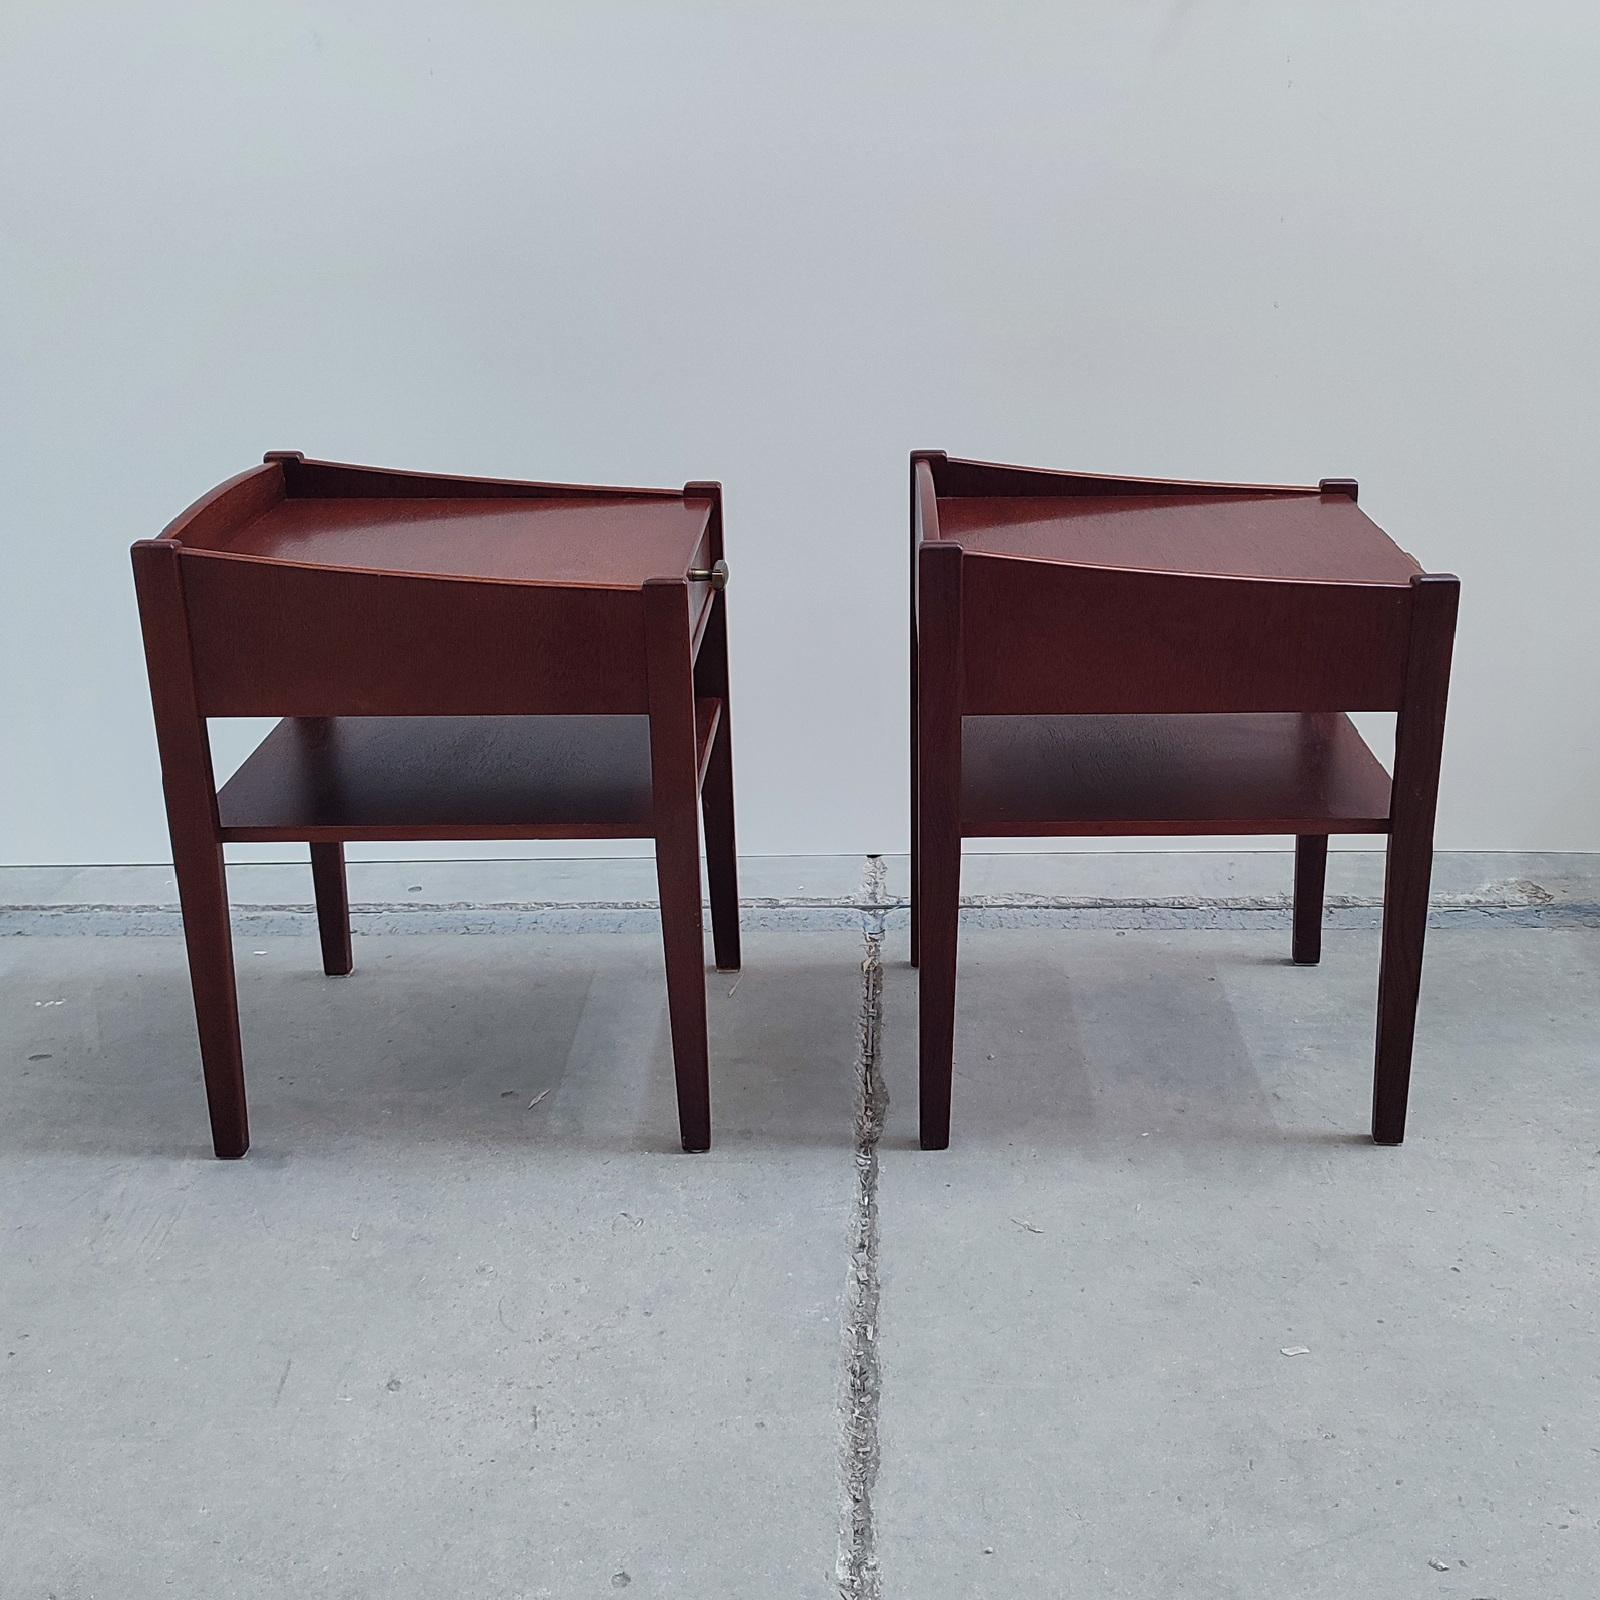 Stained Pair of Mid-century Swedish Mahogany Nightstands, Bedside Tables, 1960s